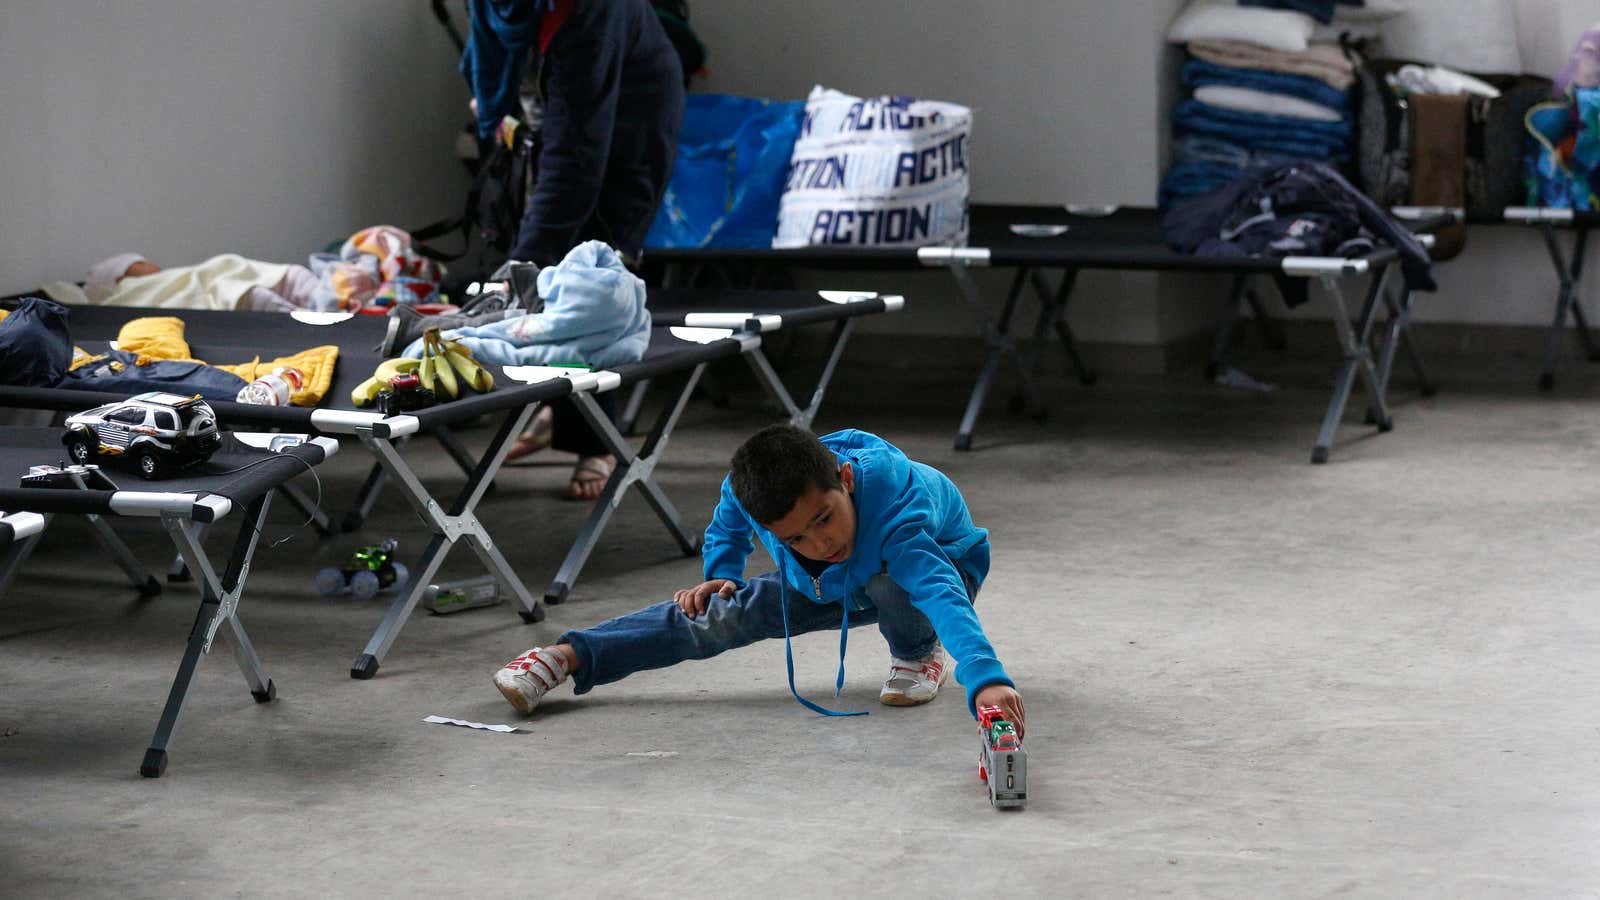 A boy from Syria at a refugee centre in Germany